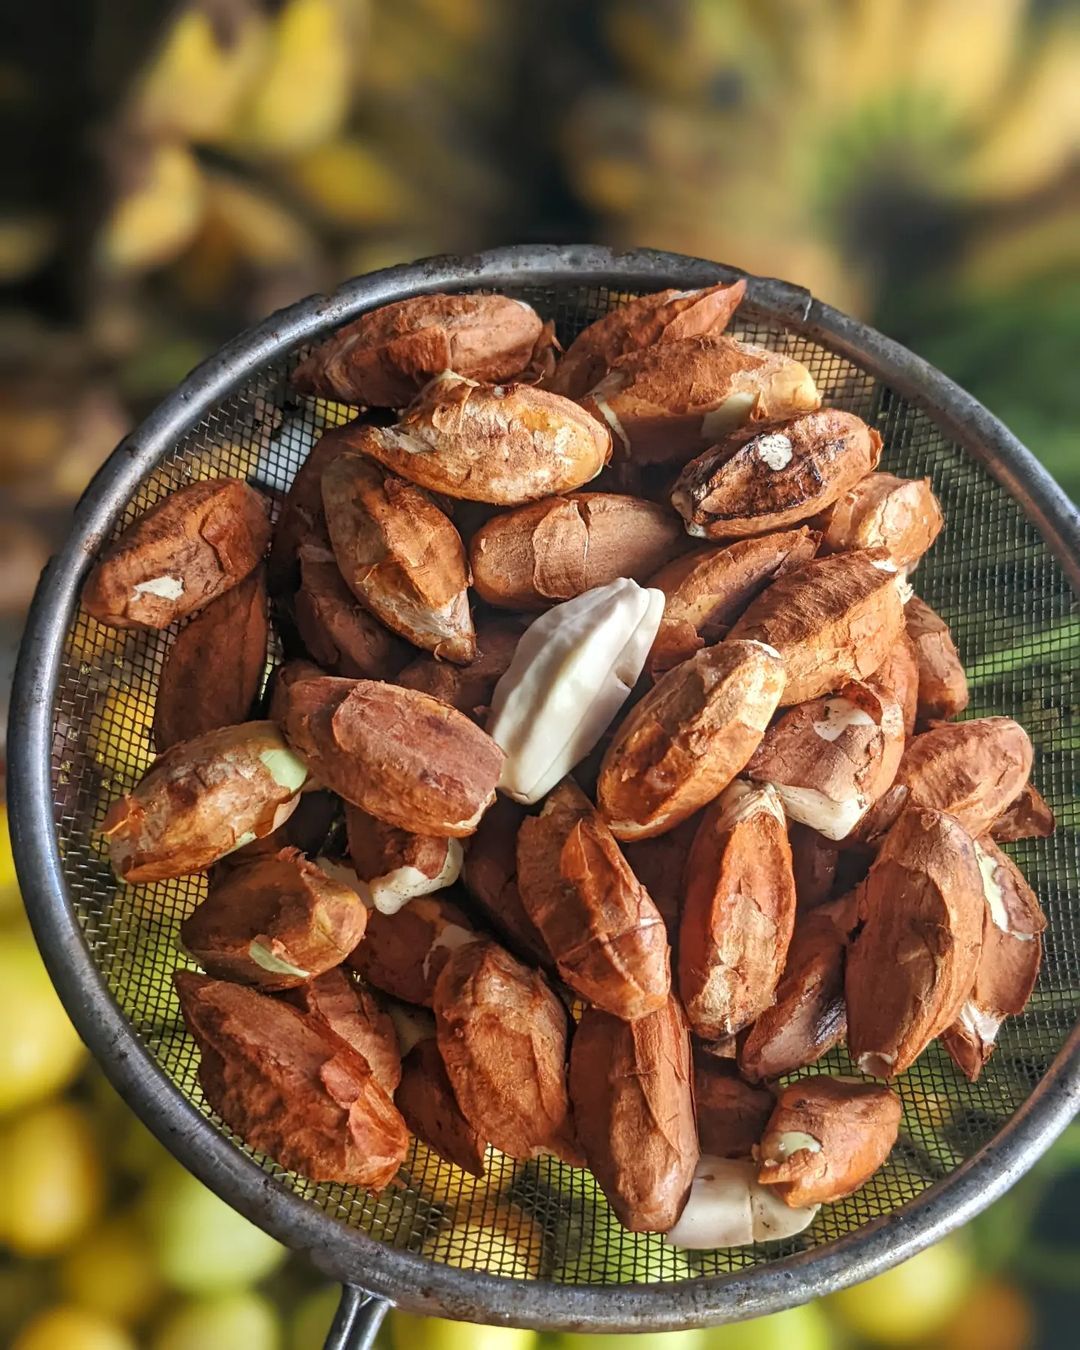 Things to do in Sorsogon - Pili nuts